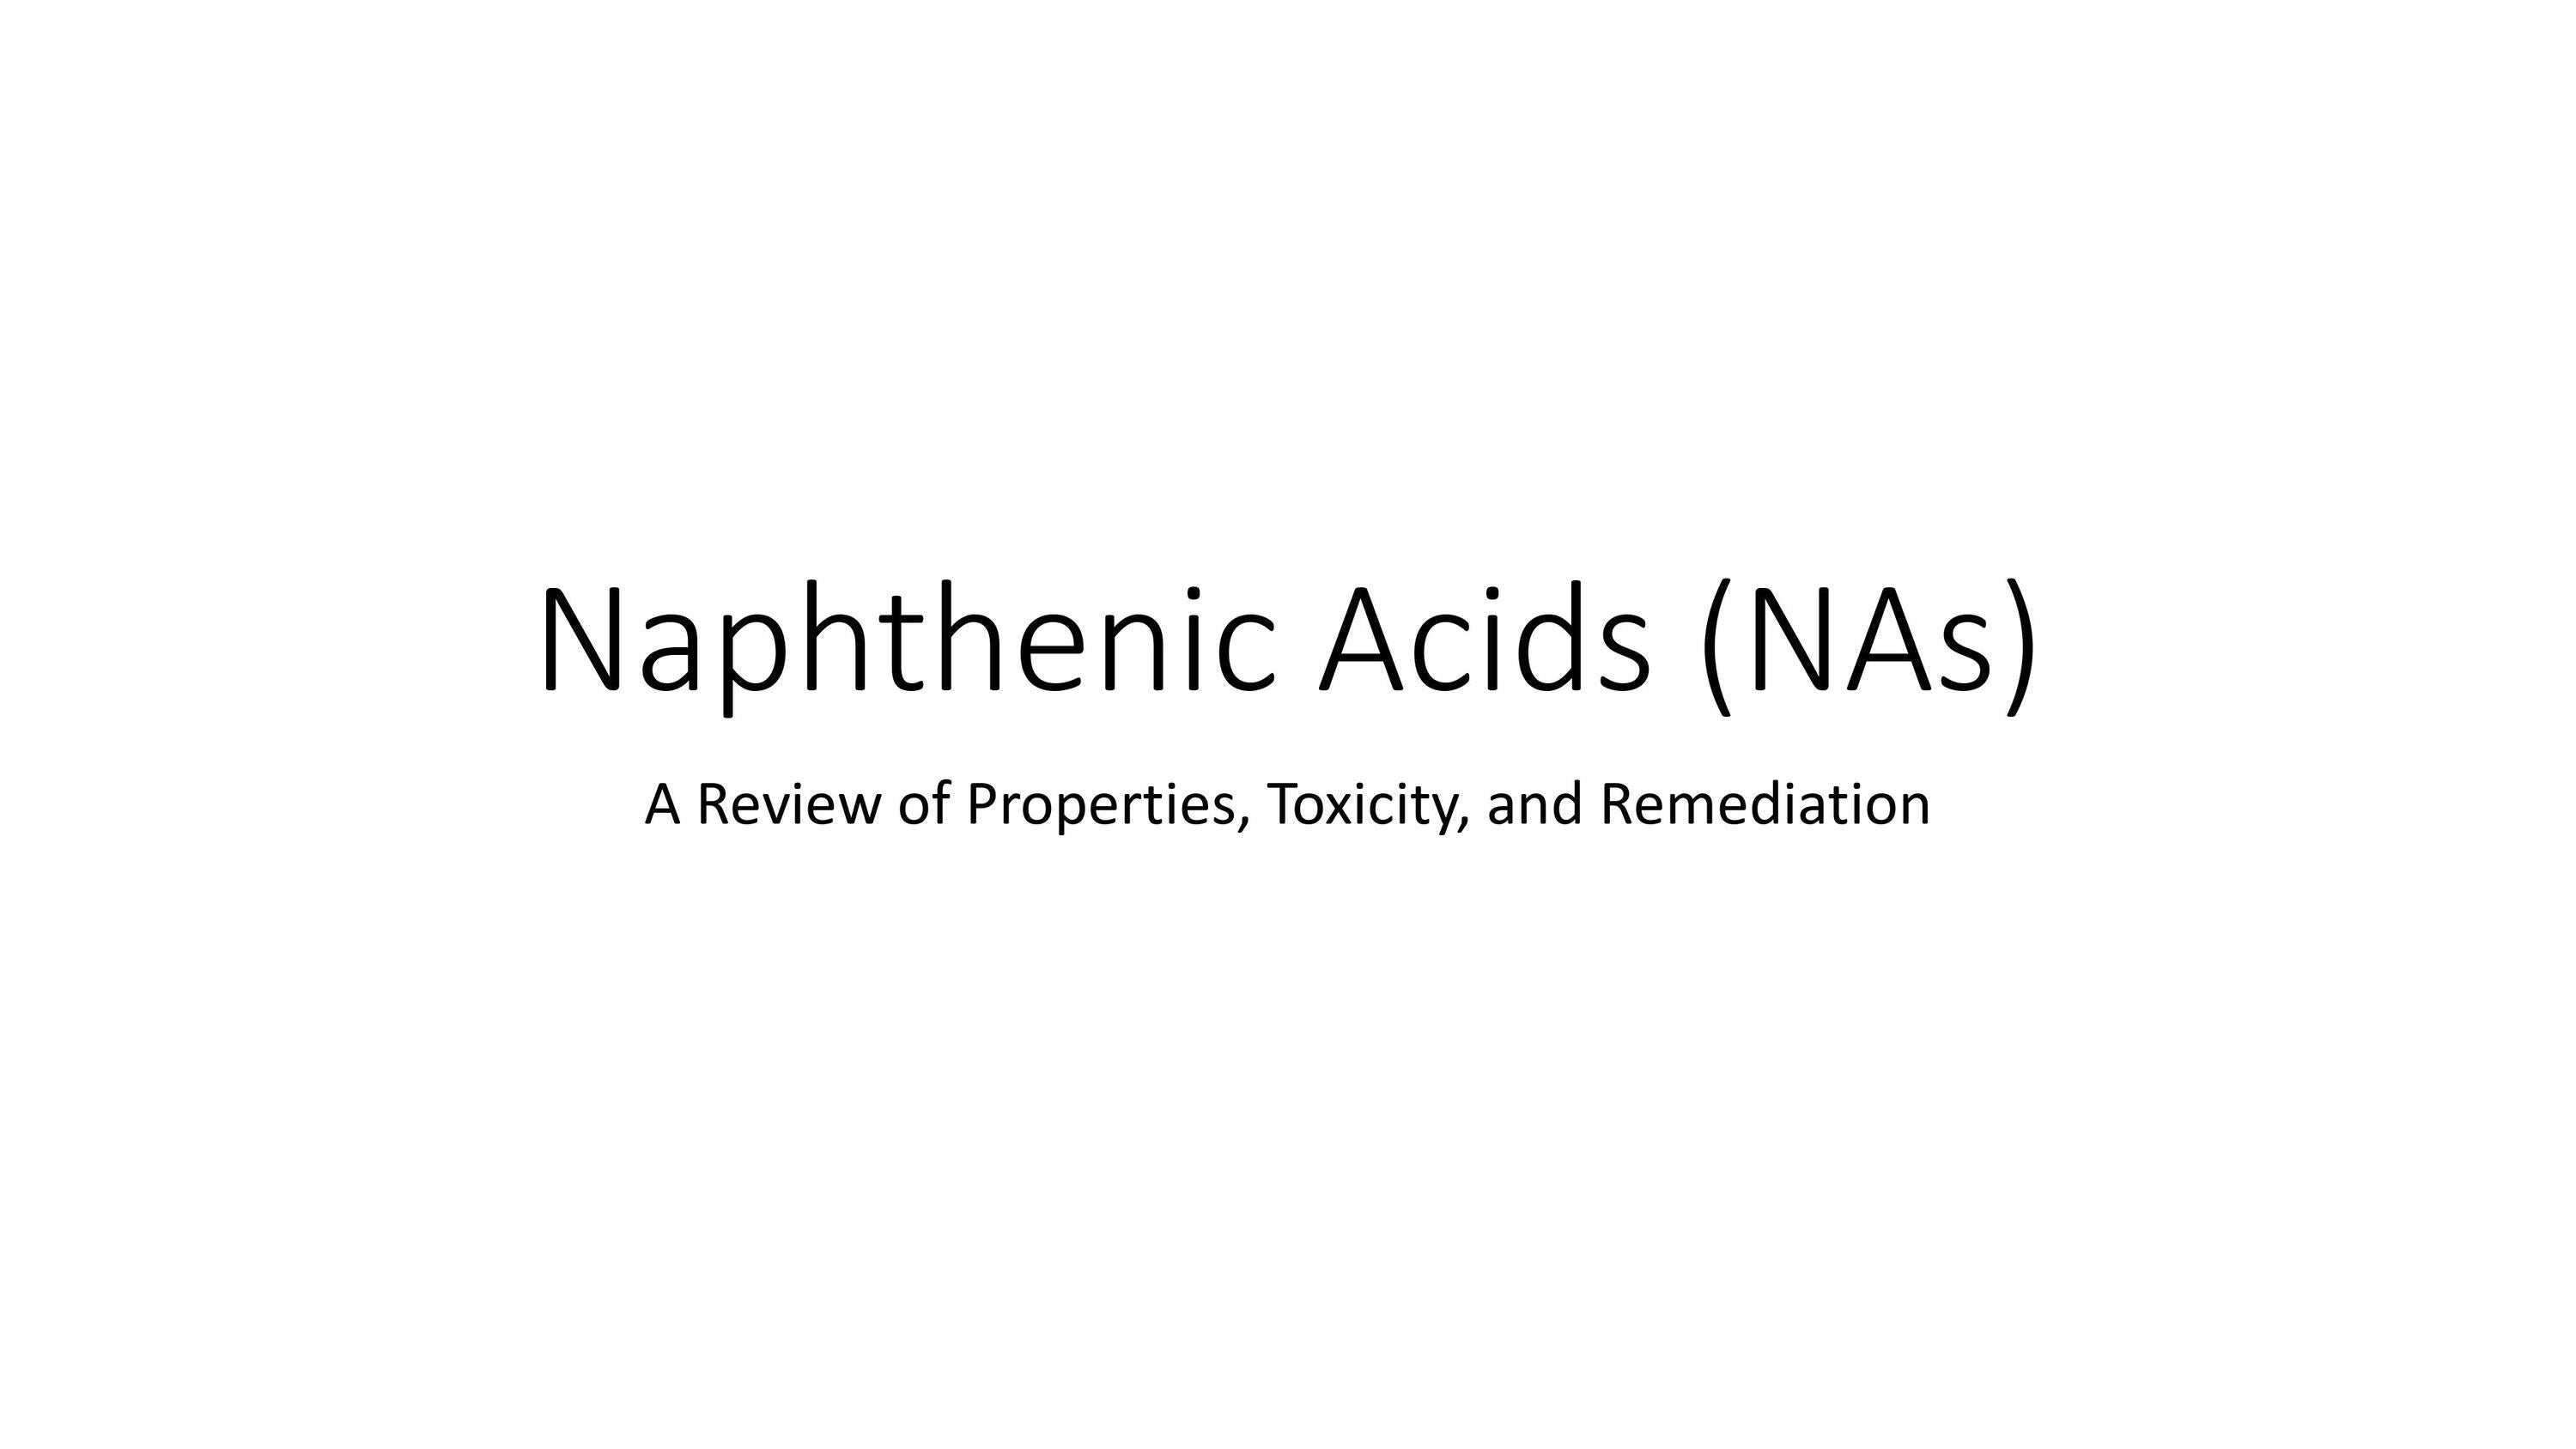 Page 1 of Naphthenic Acid Overview Presentation